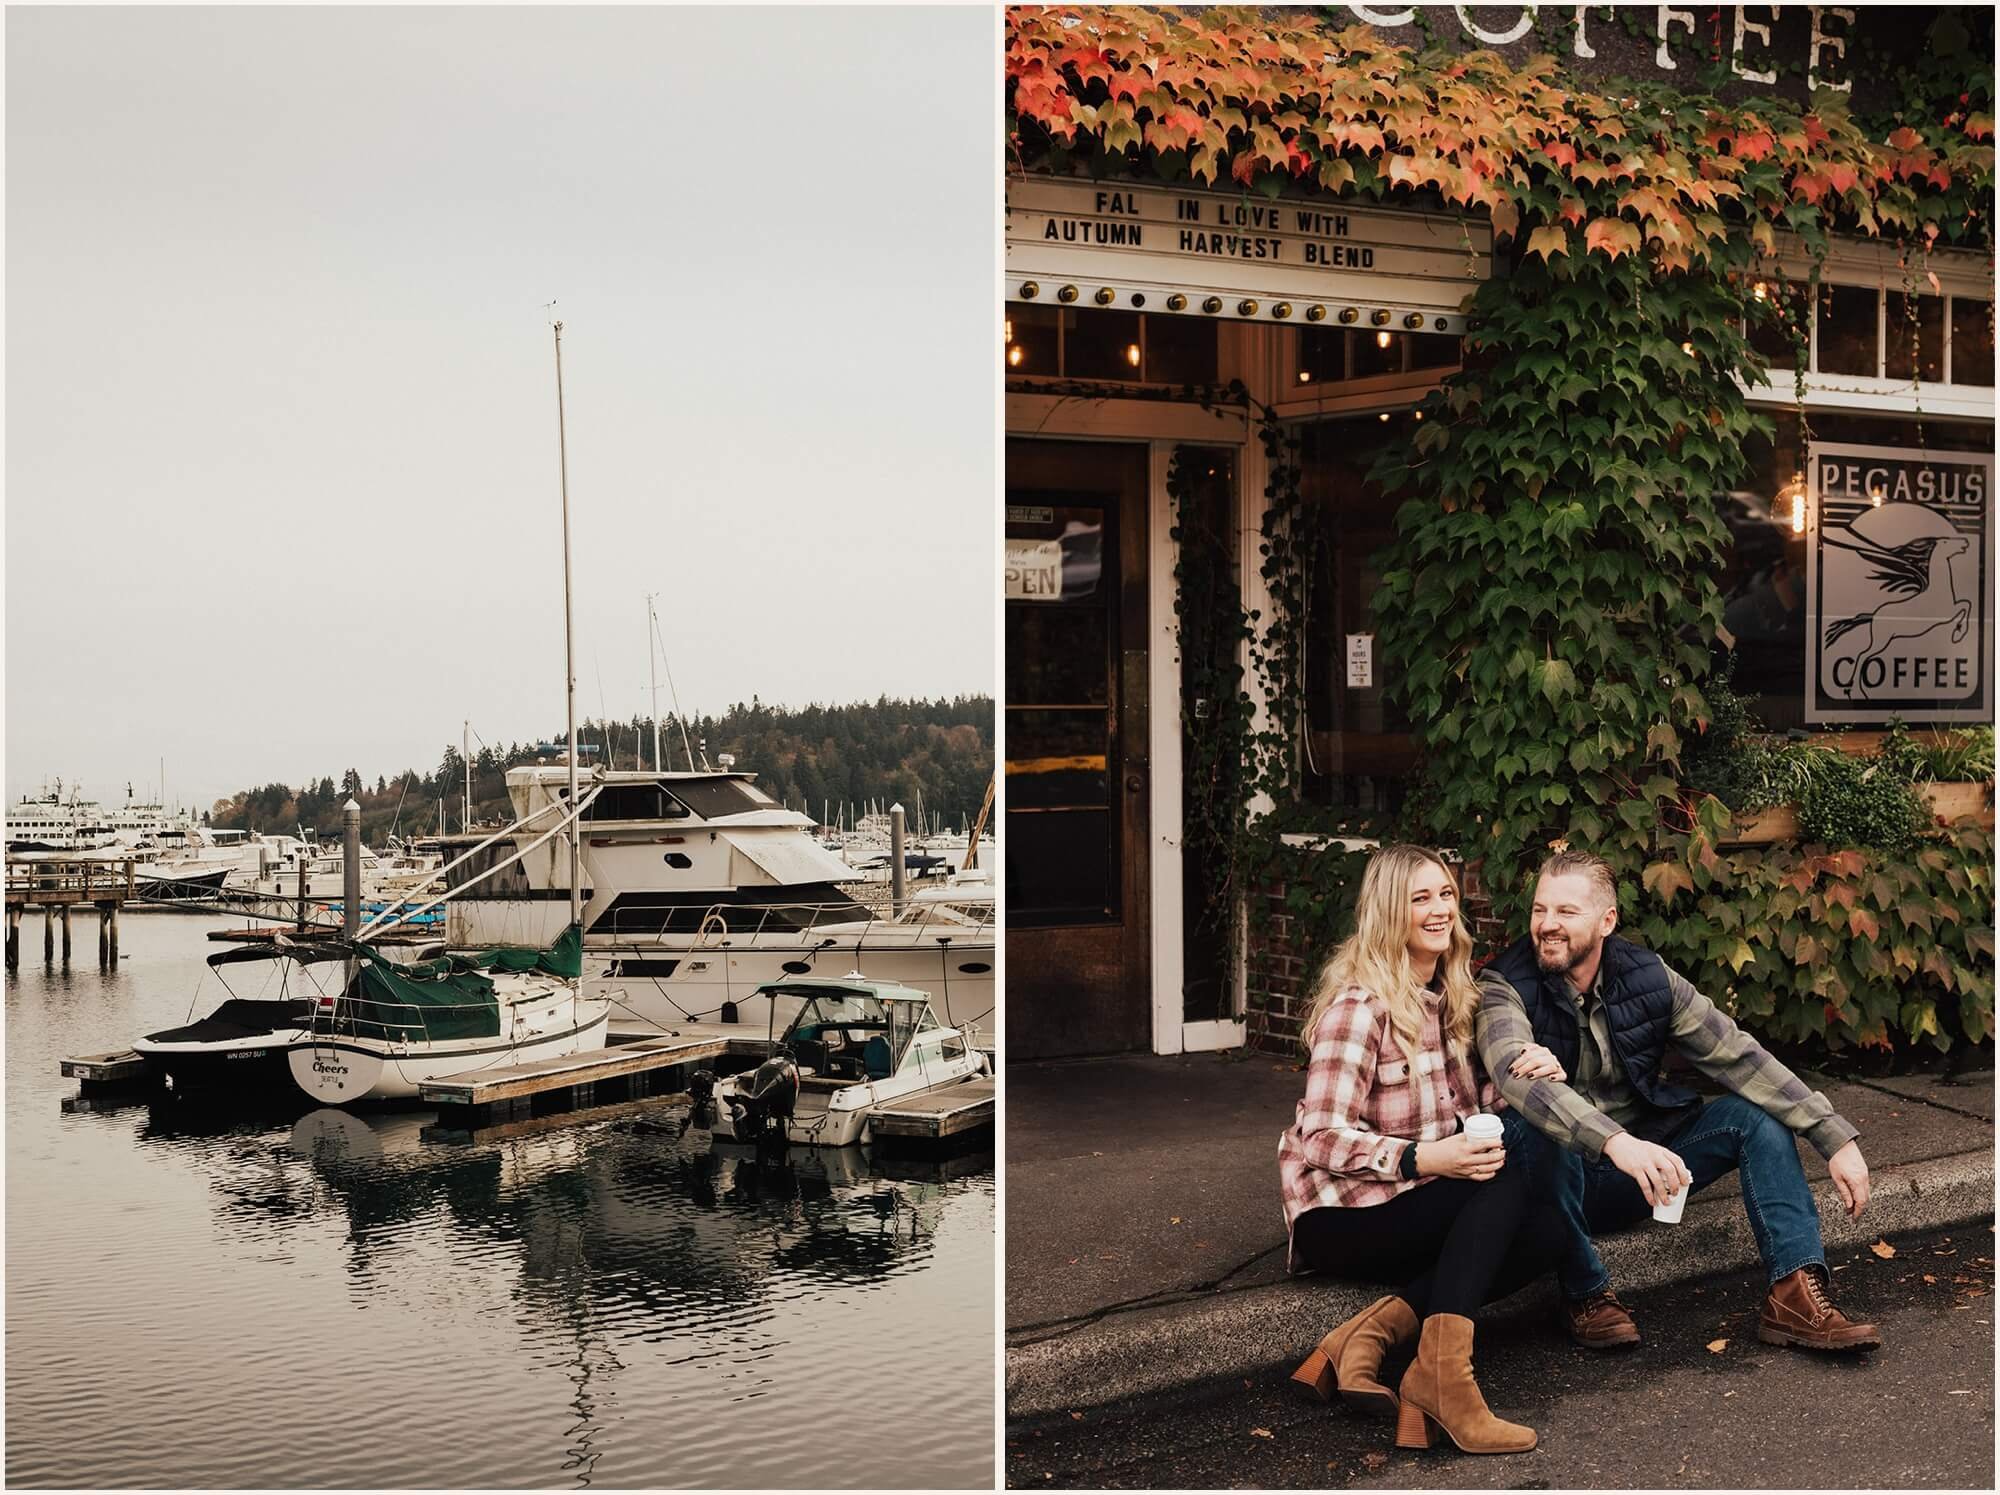 Boats docked at Bainbridge Island and couple sitting on curb outside coffee shop